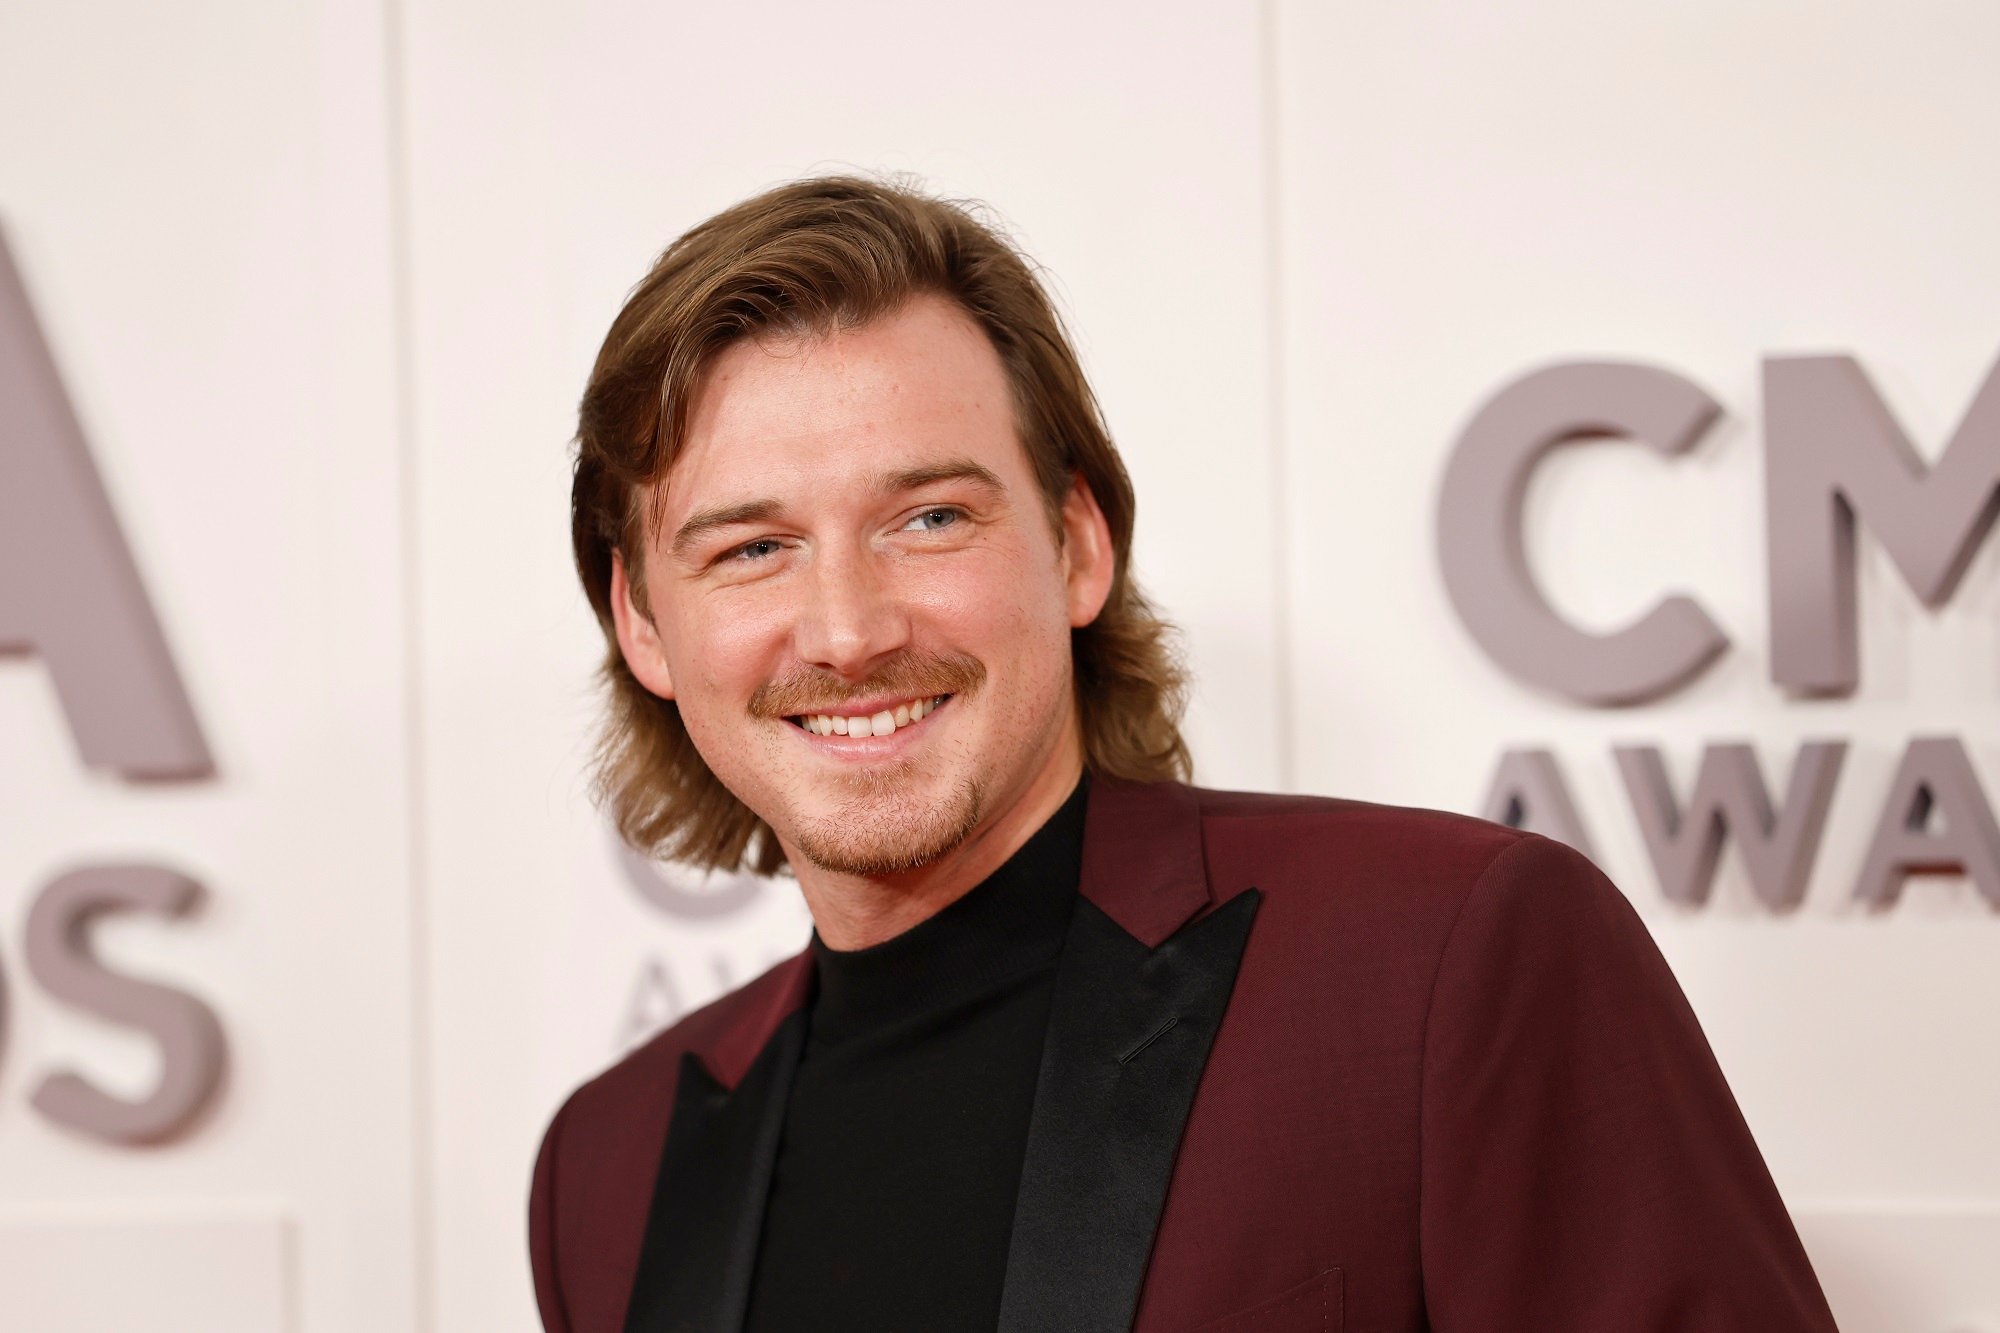 Morgan Wallen smiles while wearing a burgundy and black suit